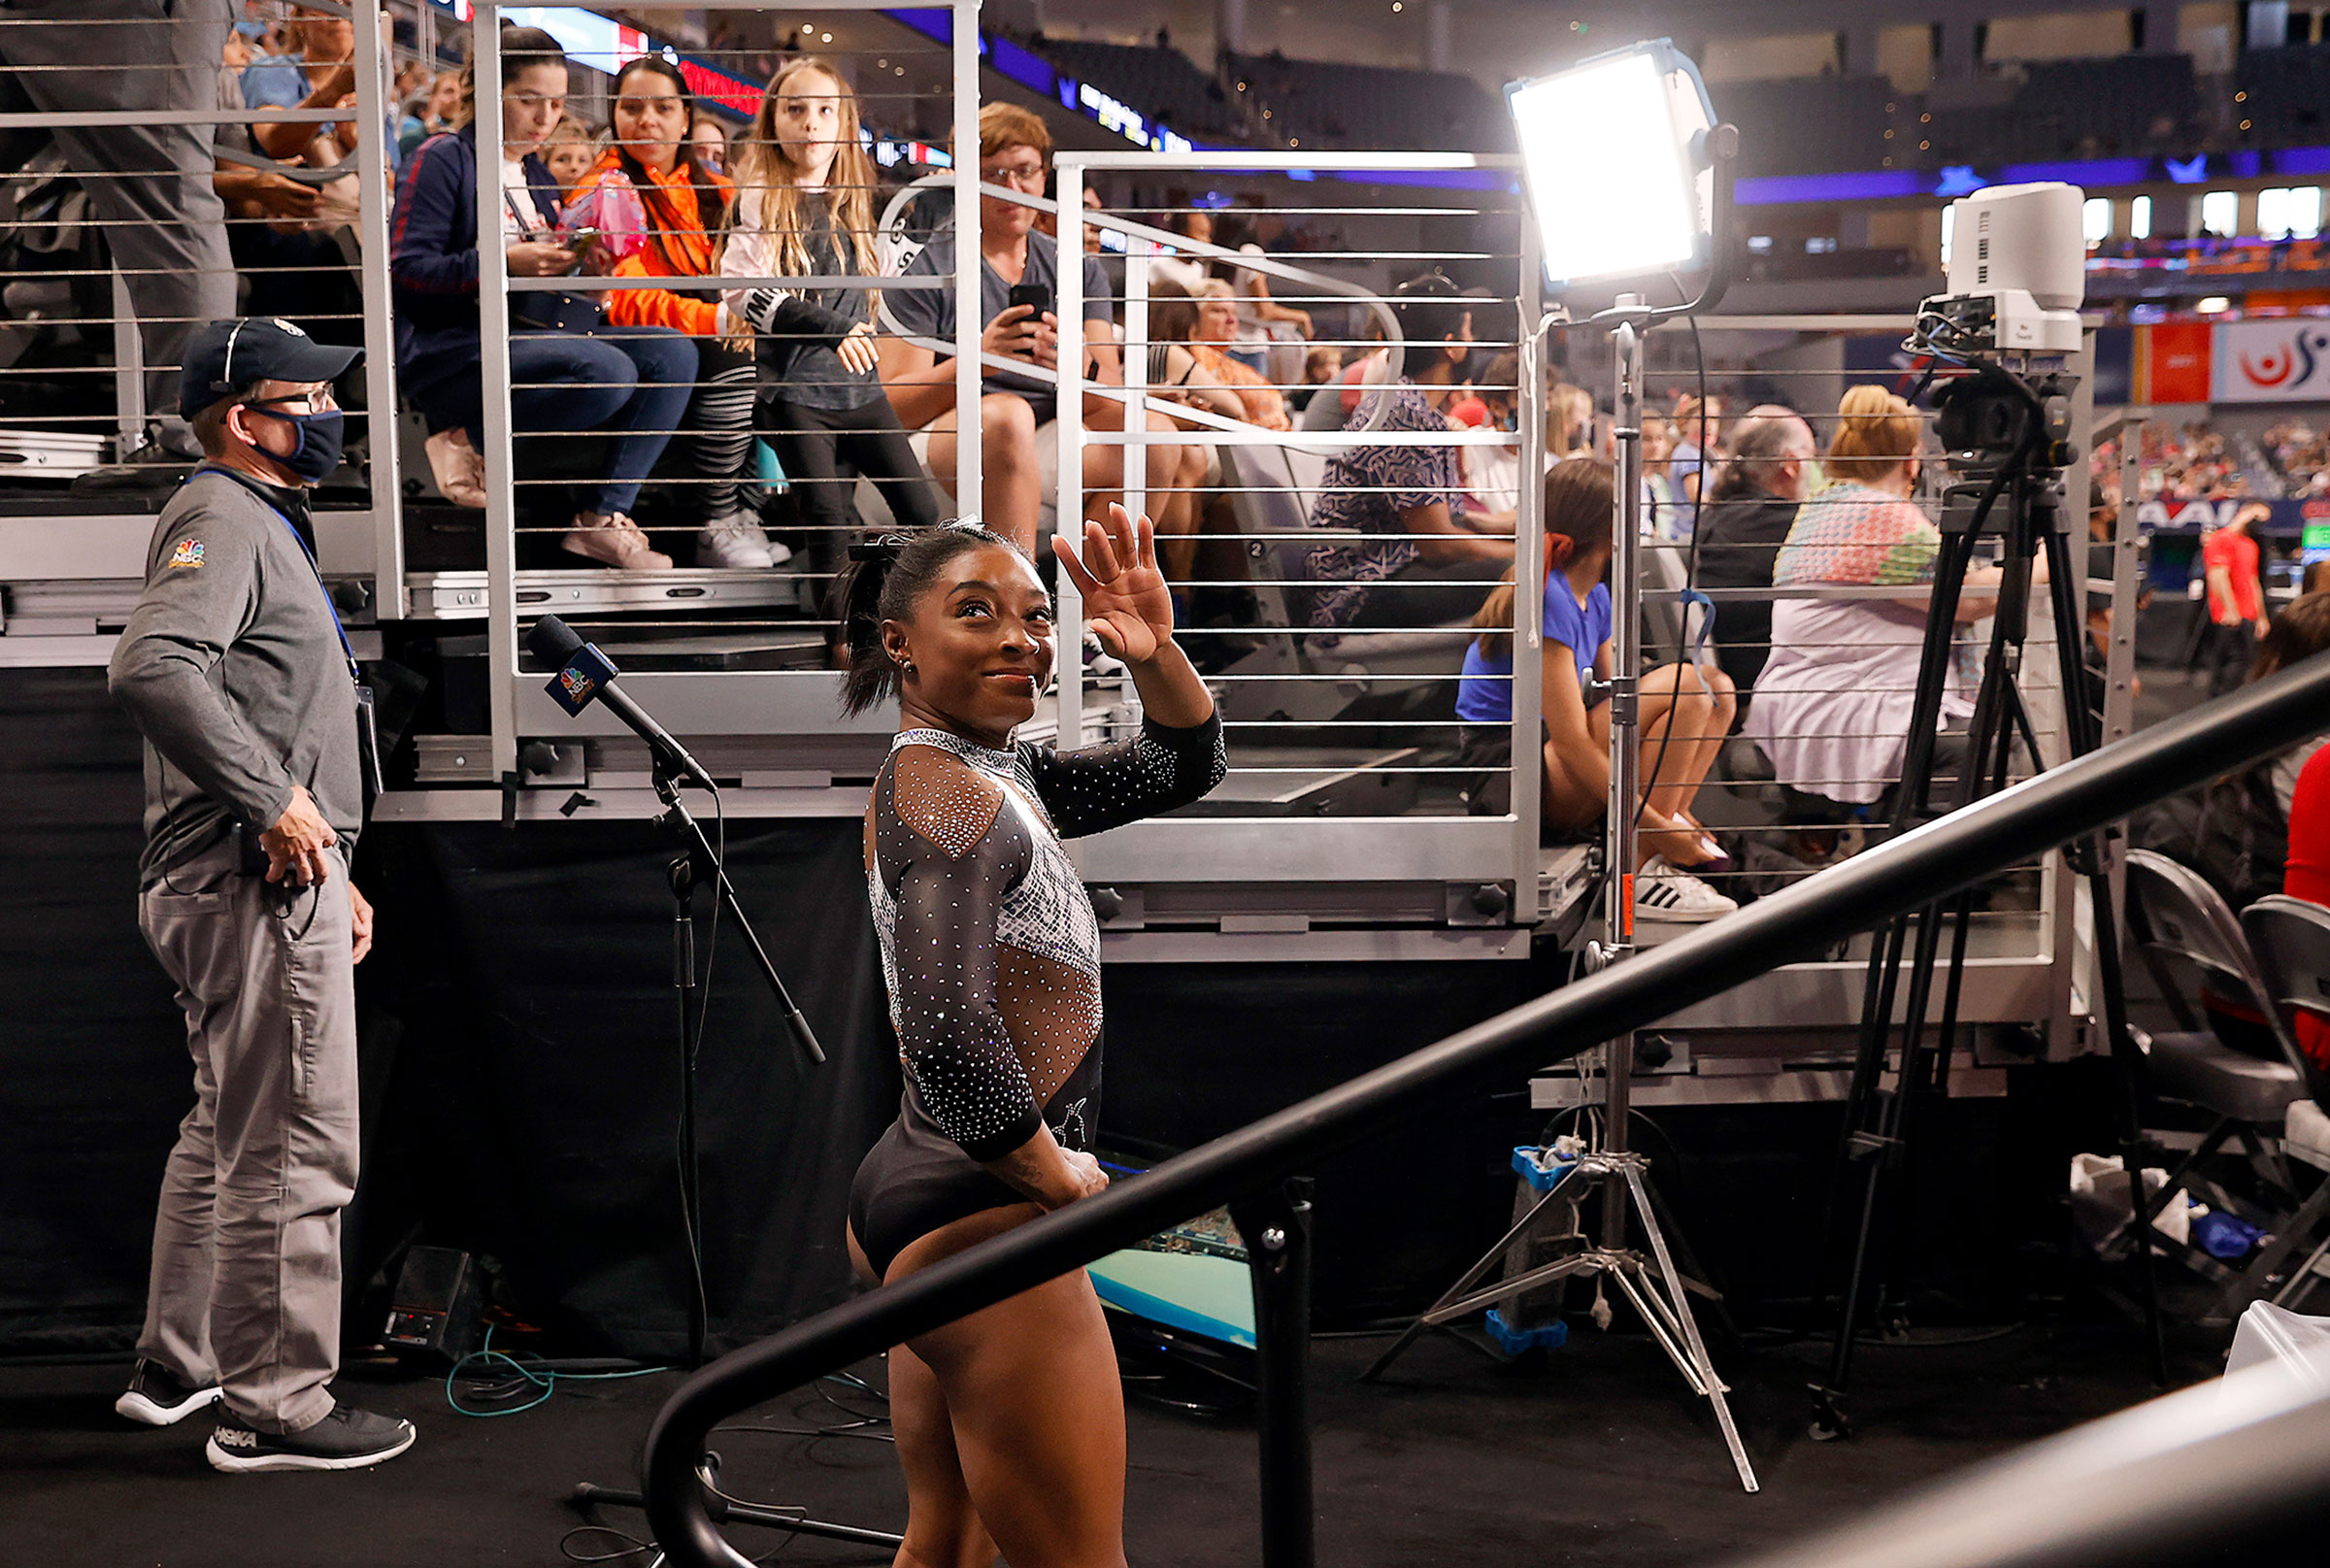 Biles waves after winning her seventh U.S. championship on June 6, 2021 in Fort Worth, Texas.